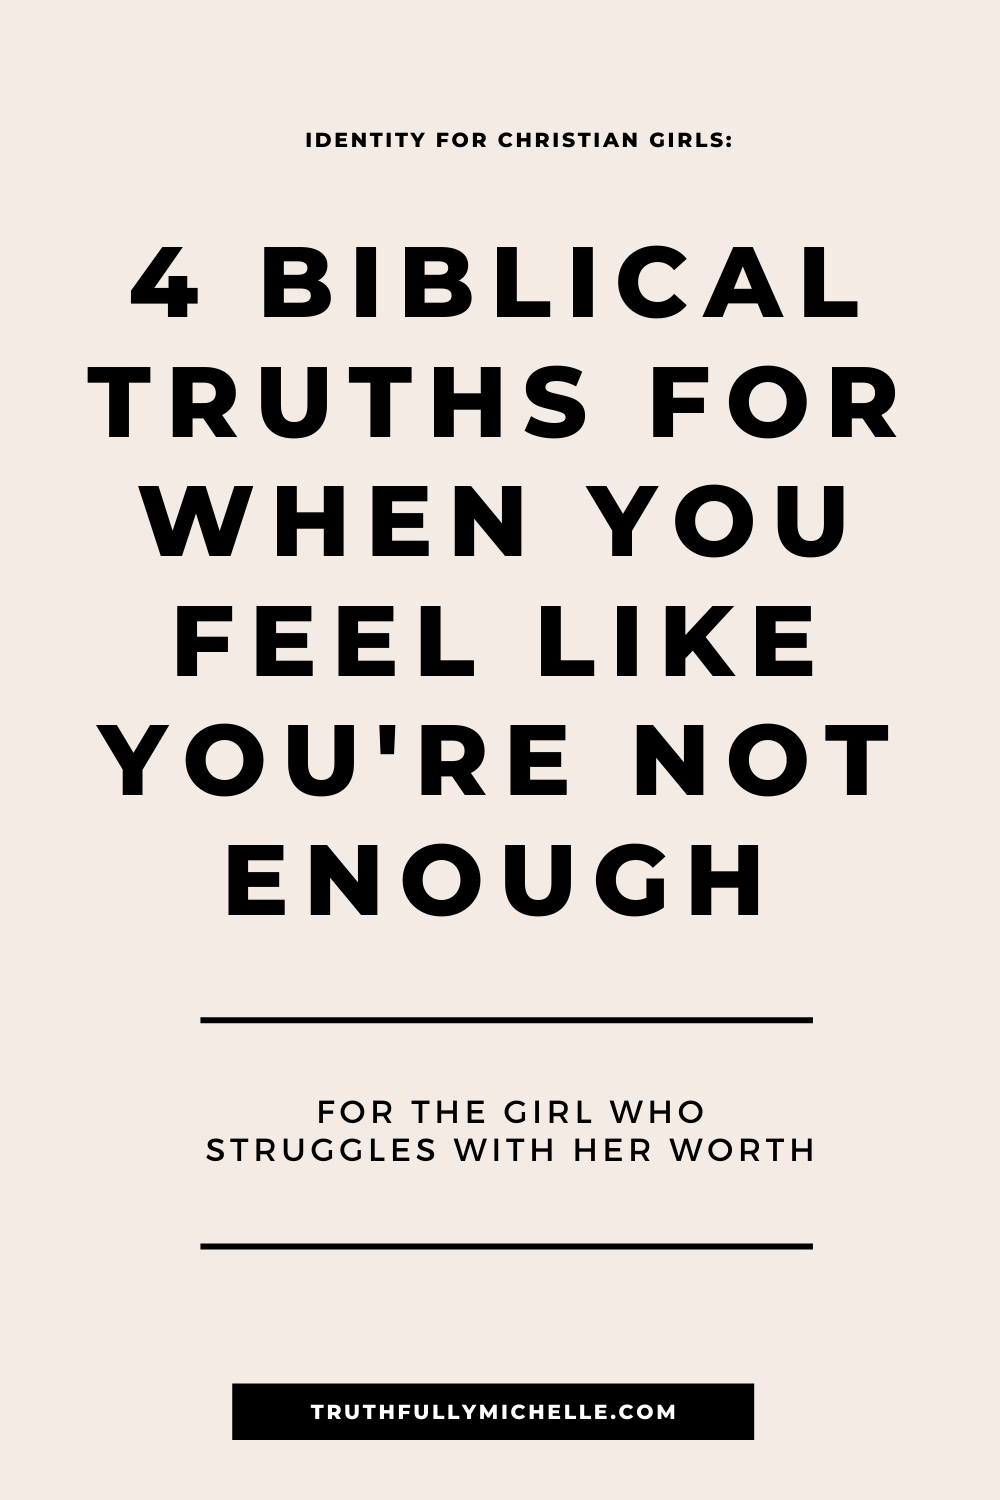 Biblical truths for women, Biblical truths for girls, Speaking Biblical truths, Why I am not enough, I know I am not enough, When I am not enough, When I feel like I am not enough, I am not enough but God is, Christ is enough for me, Christ is enough Jesus, Jesus is enough for me , God is enough for me, Only God is enough, My God is enough, Until God is enough, When God is enough, God is enough for us, Find your worth in Christ, Knowing your worth in Christ, Self worth in Christ, Finding my worth in Christ, Finding worth in Jesus, Find your worth in Jesus, My God is more than enough, Is Jesus enough for you